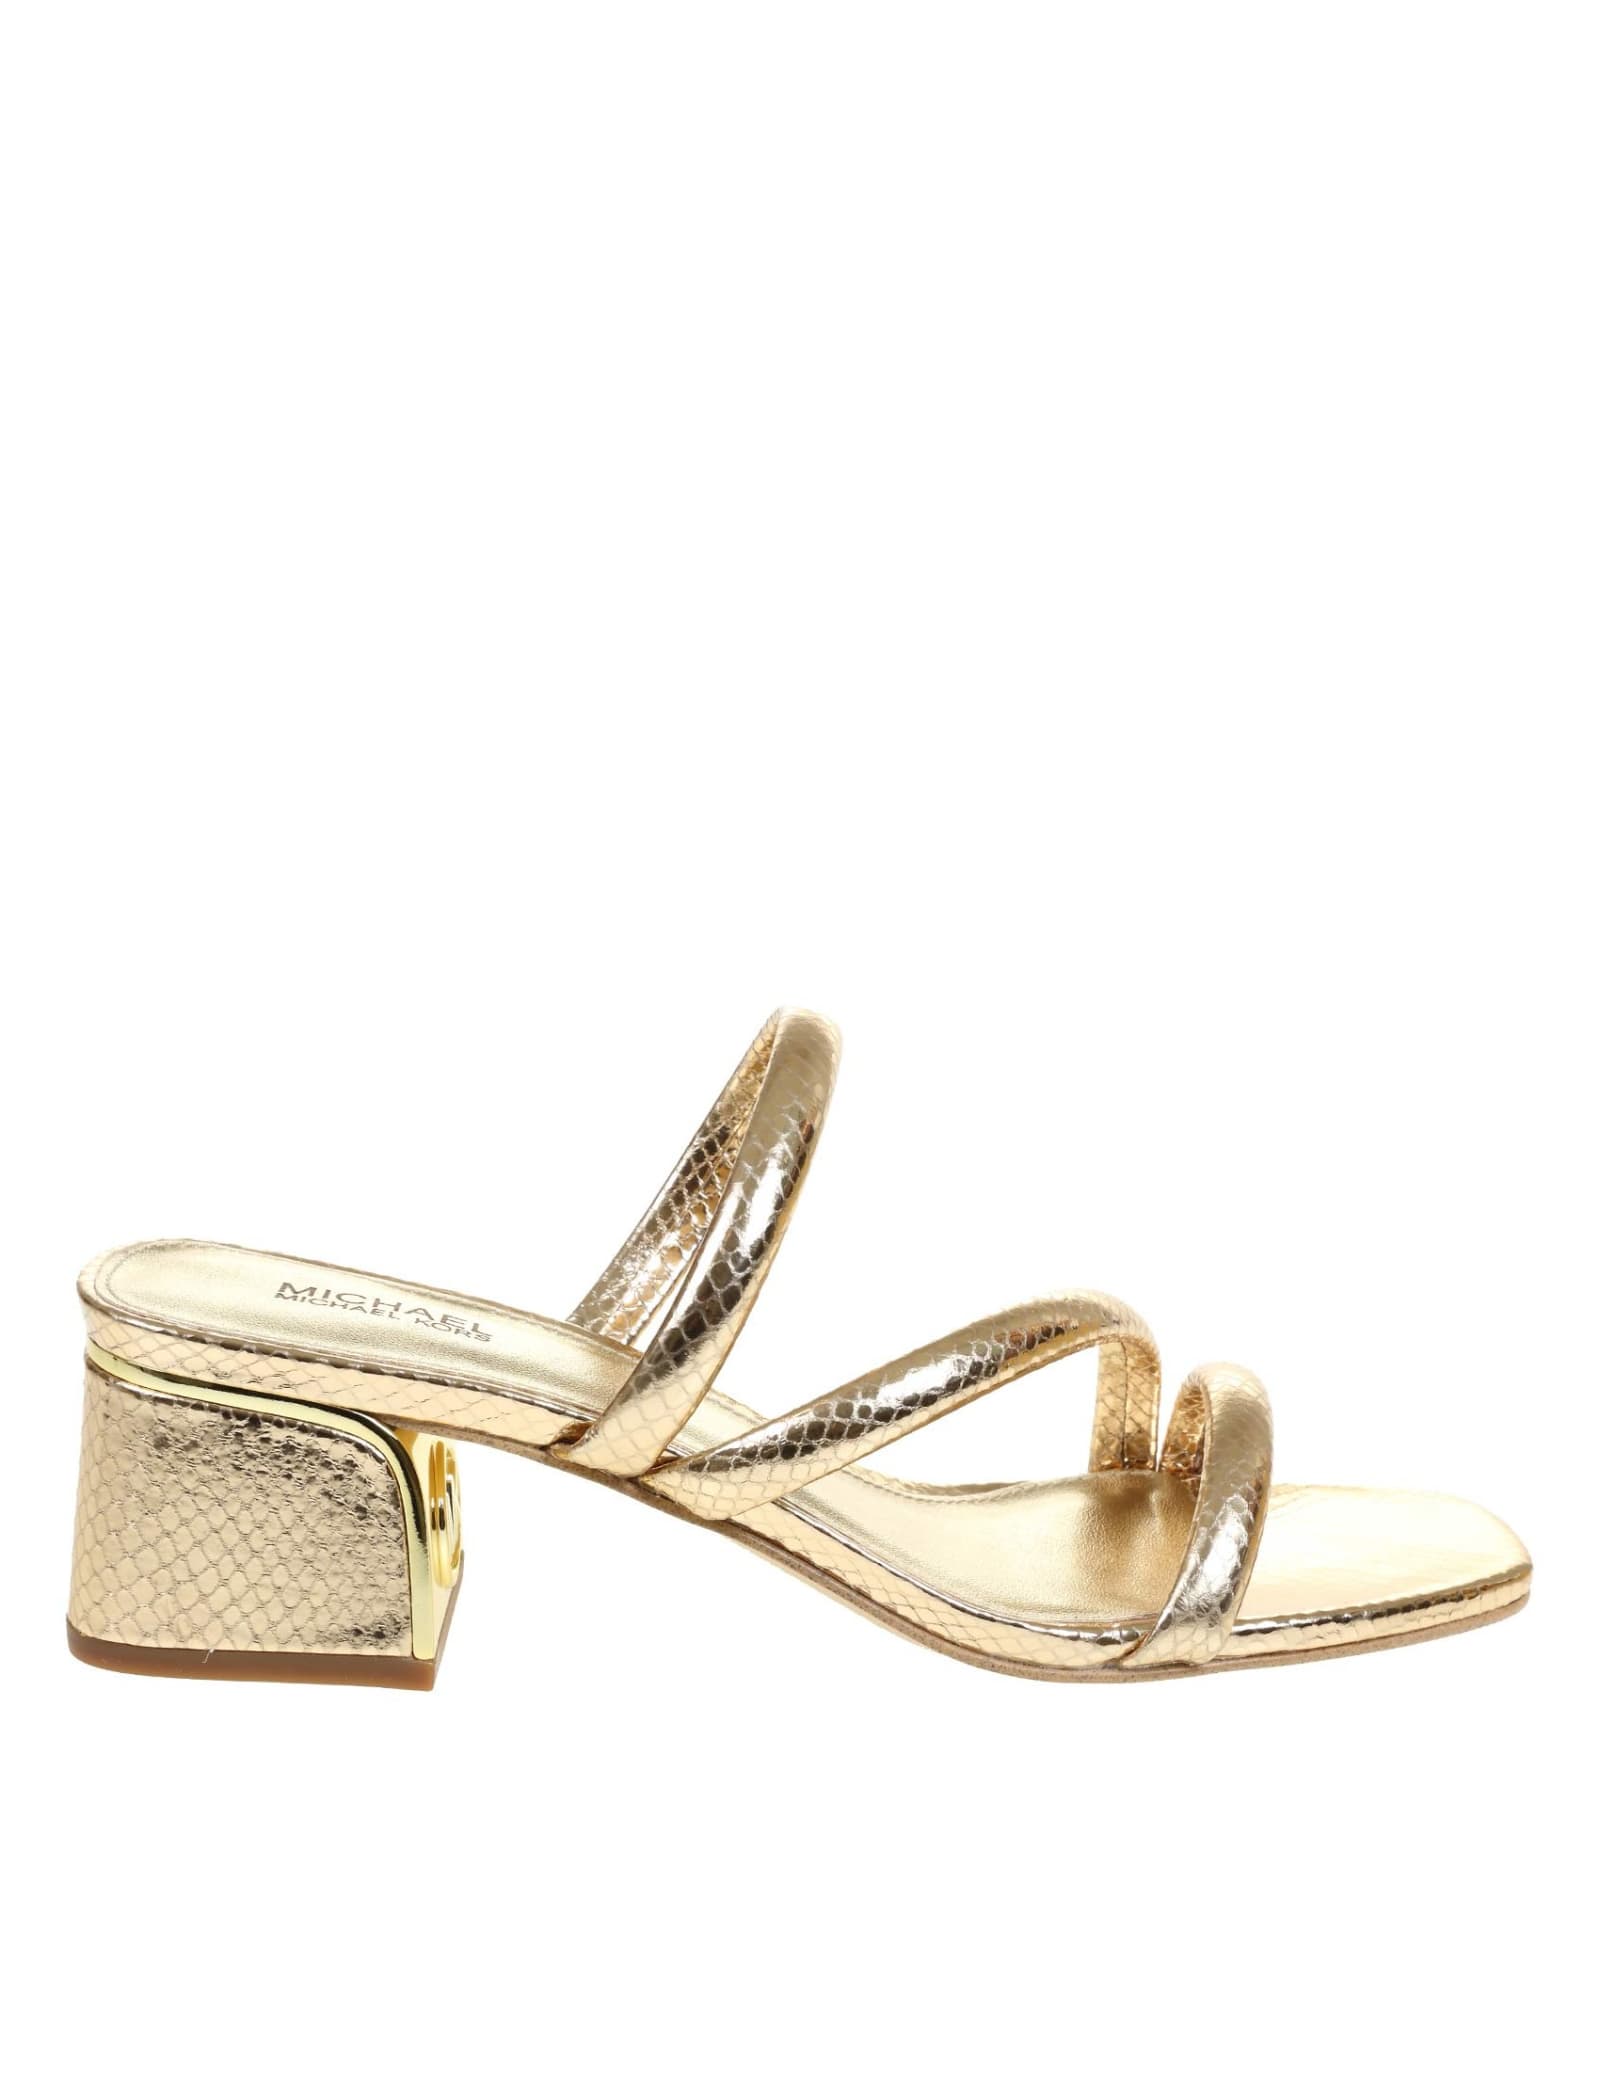 Buy Michael Kors Lana Sandal In Laminated Leather With Python Print online, shop Michael Kors shoes with free shipping